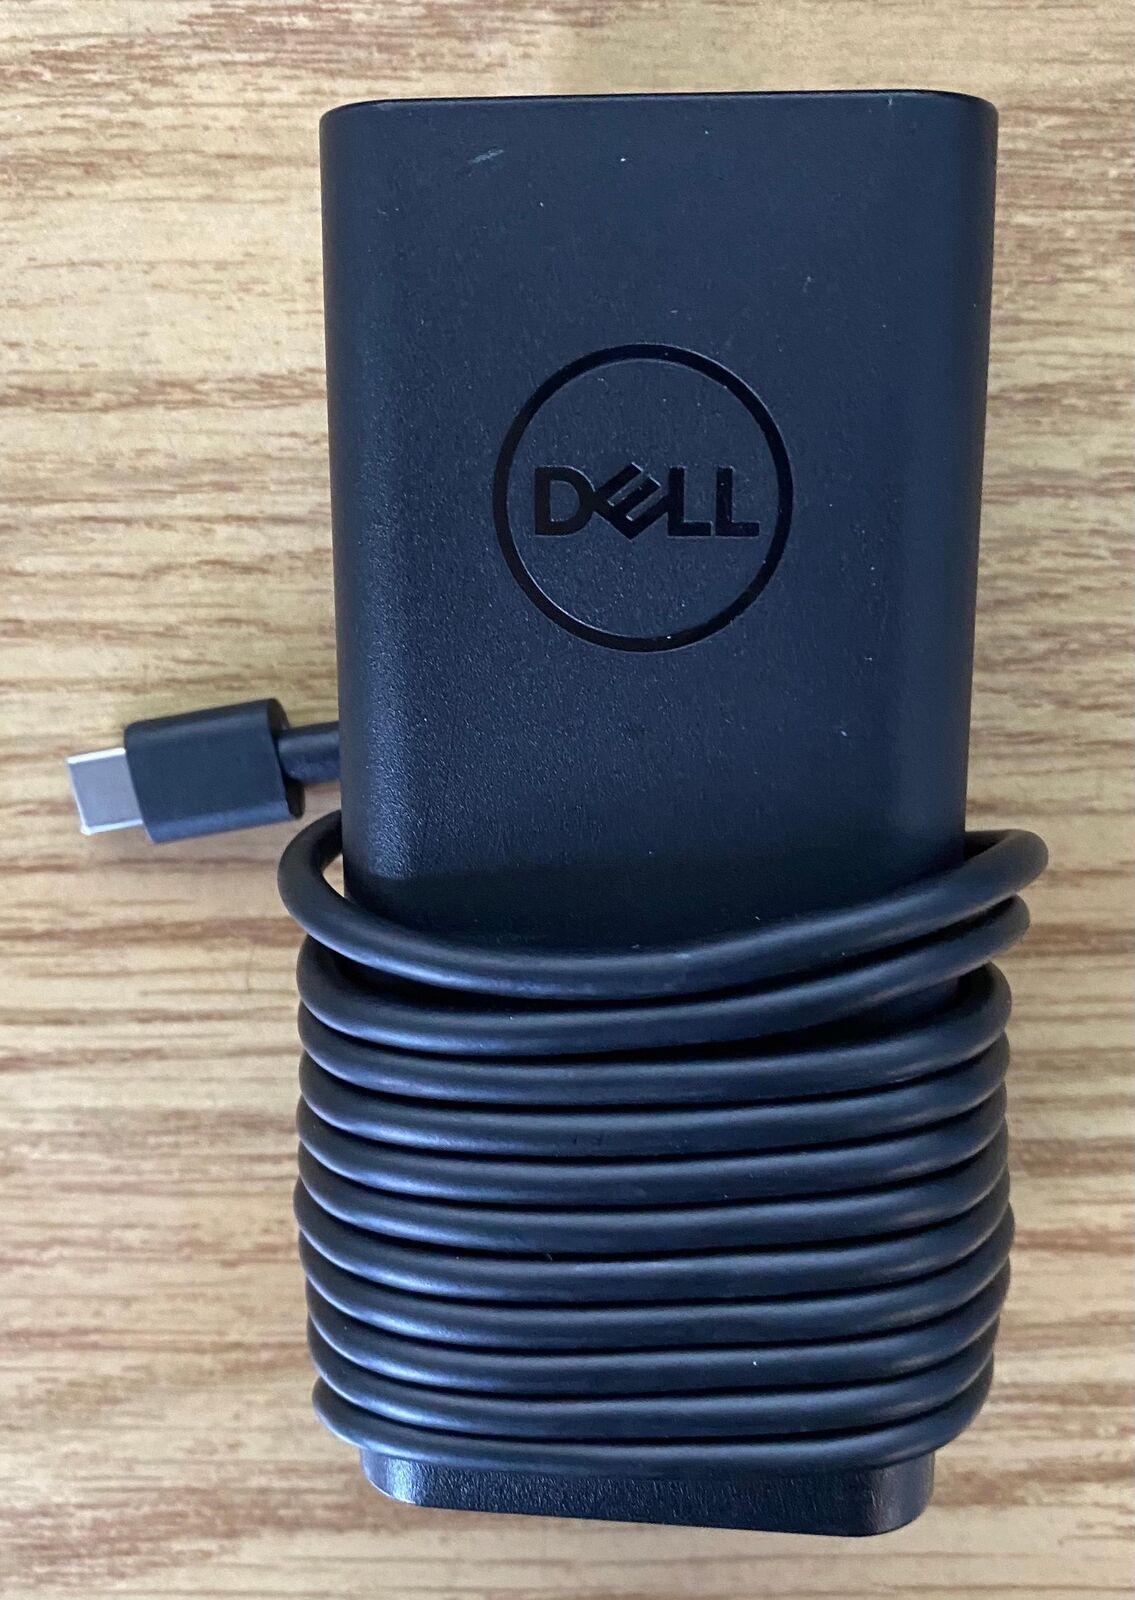 DELL Chromebook 11 3100 P29T 65W Genuine Original AC Power Adapter Charger